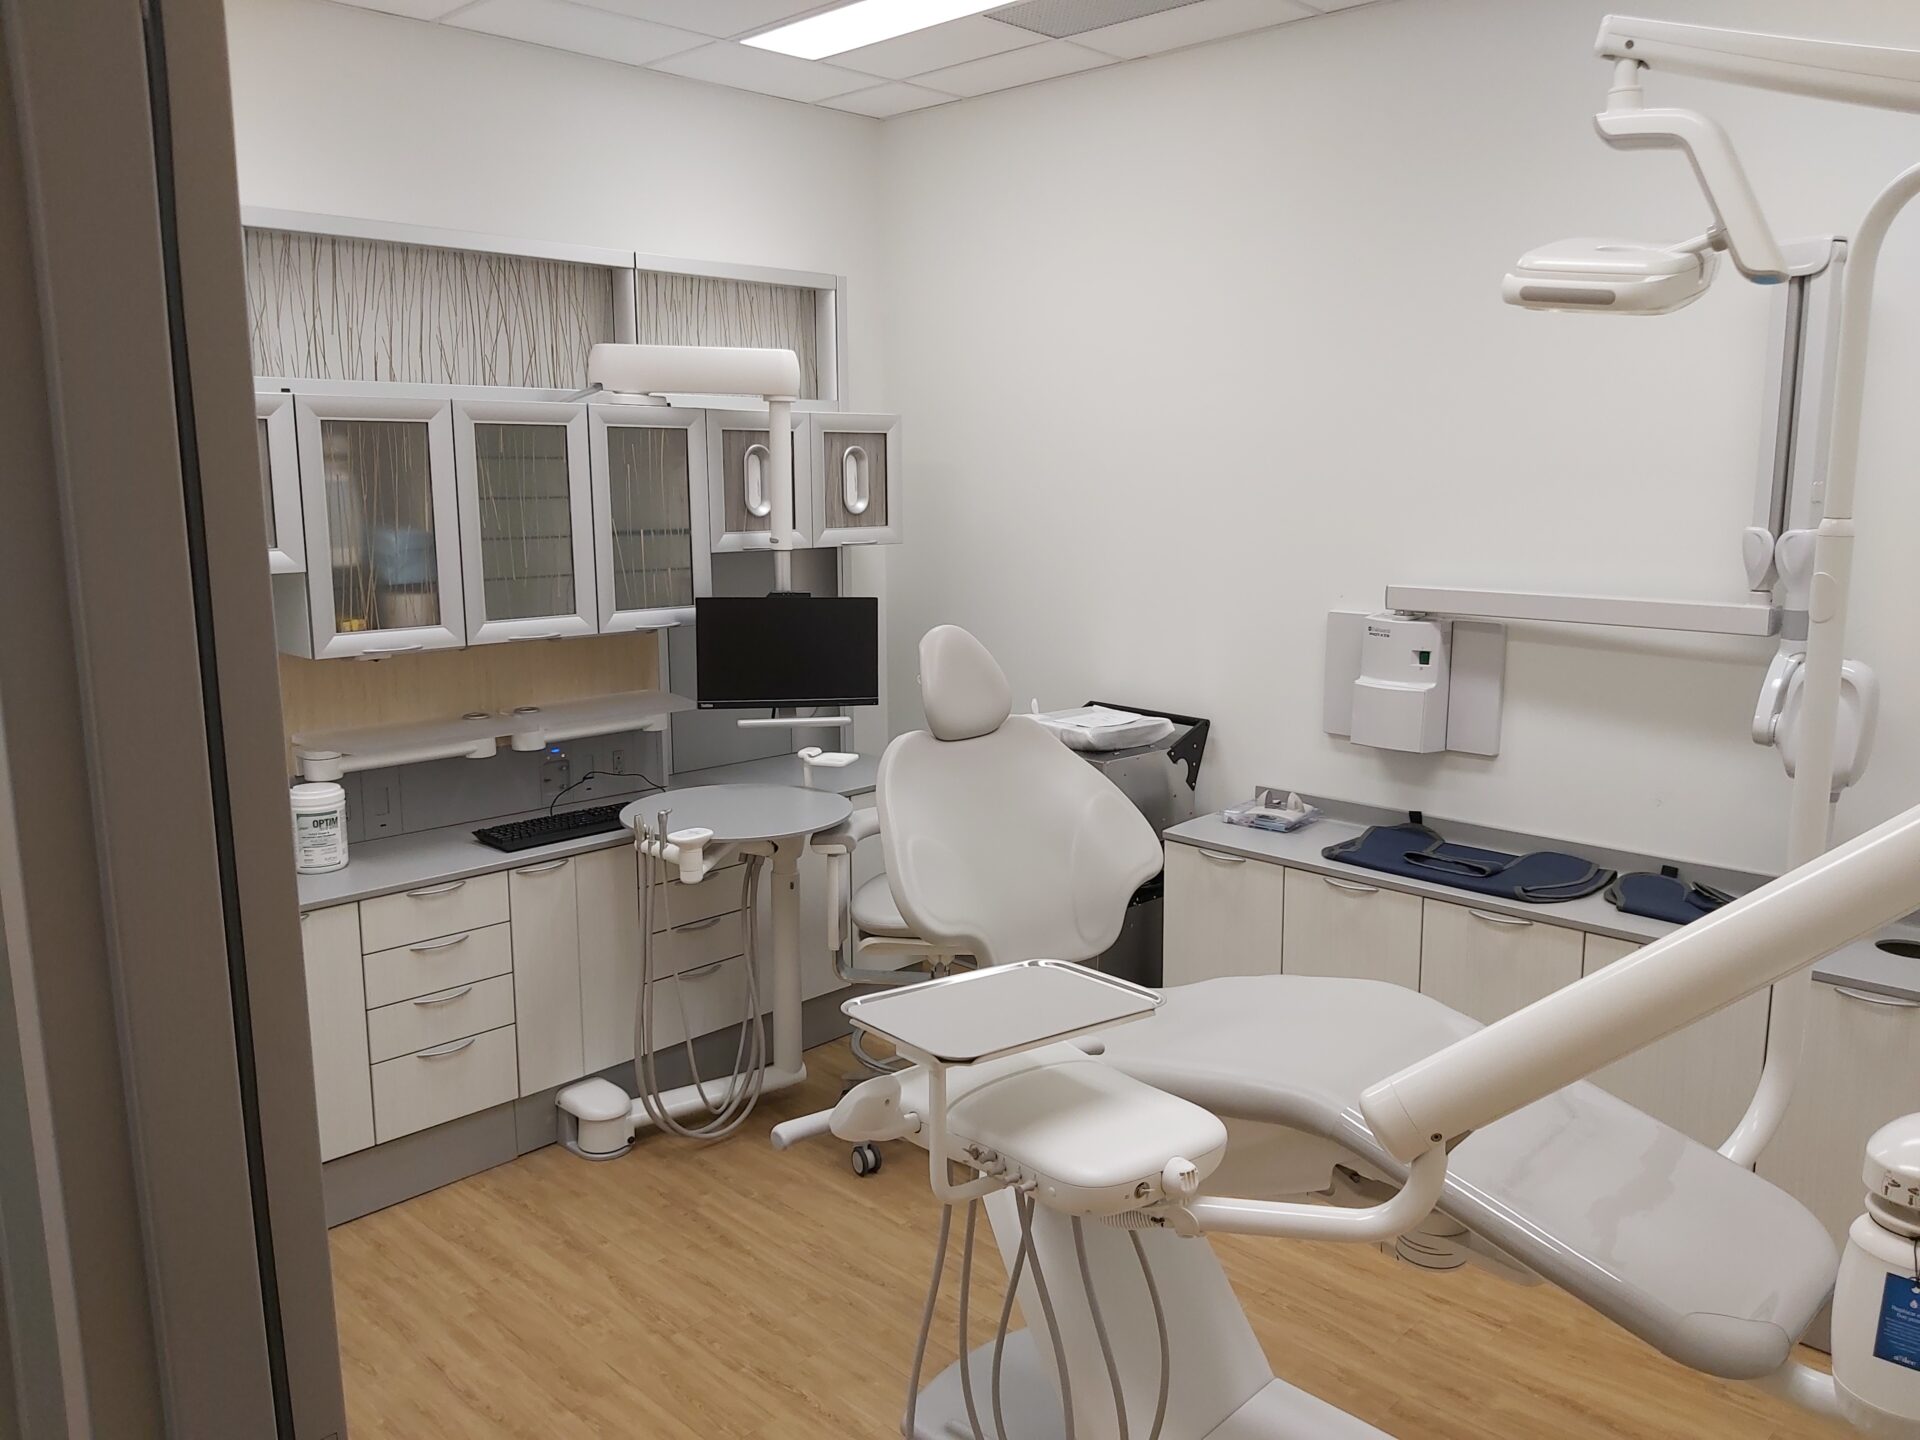 USask dental clinic offering free dental day on Friday - Prince Albert